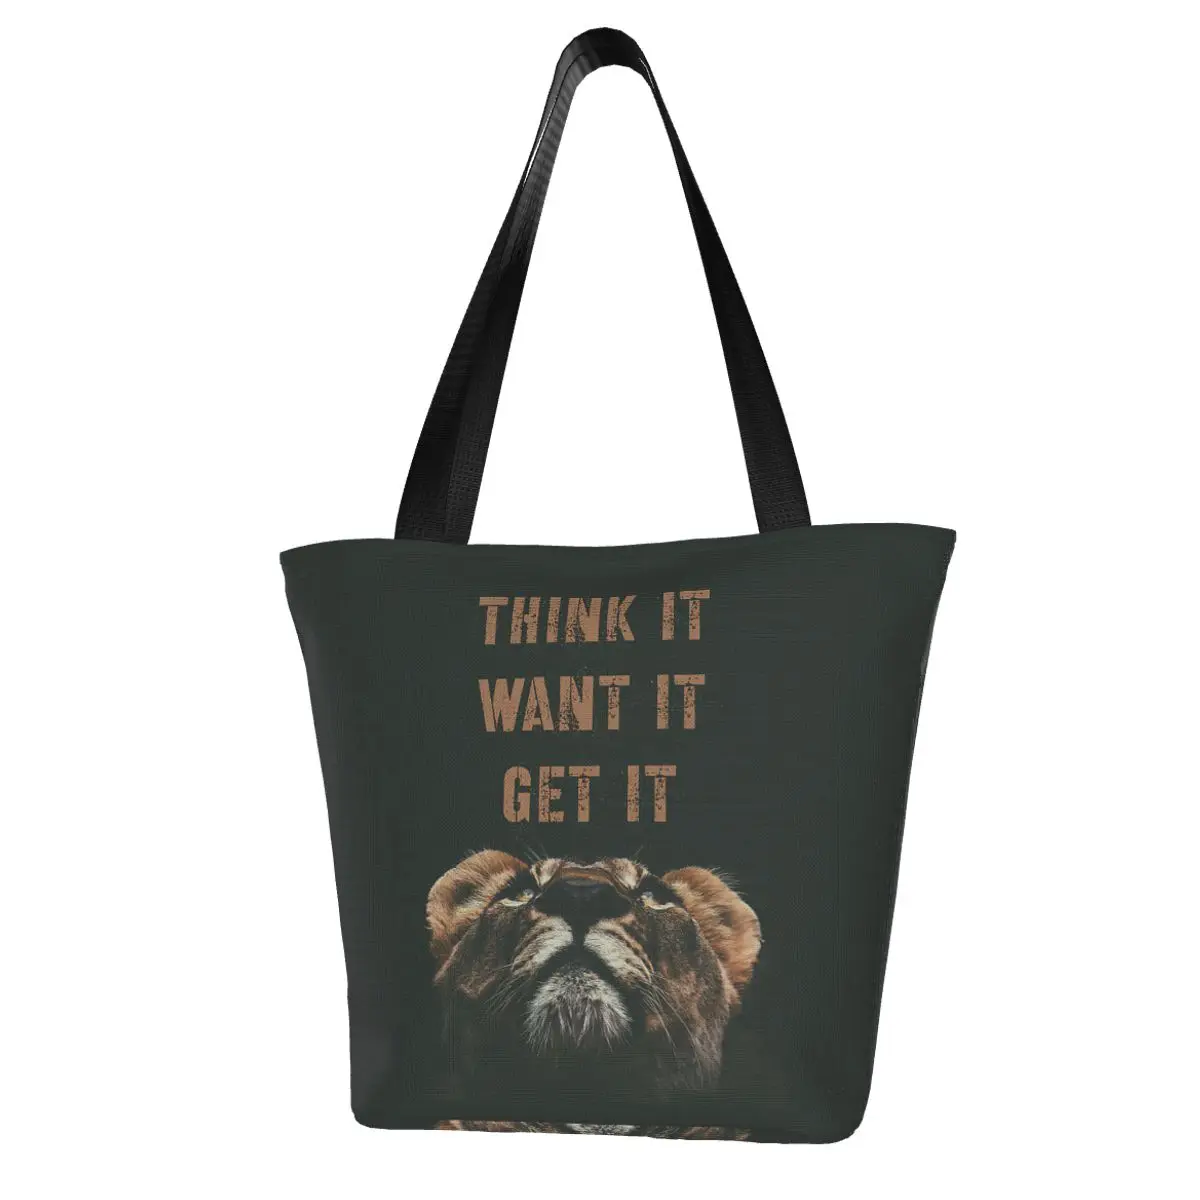 Positive Quotes And Saying Think It Want It Get It Shopping Bag Aesthetic Cloth Outdoor Handbag Female Fashion Bags